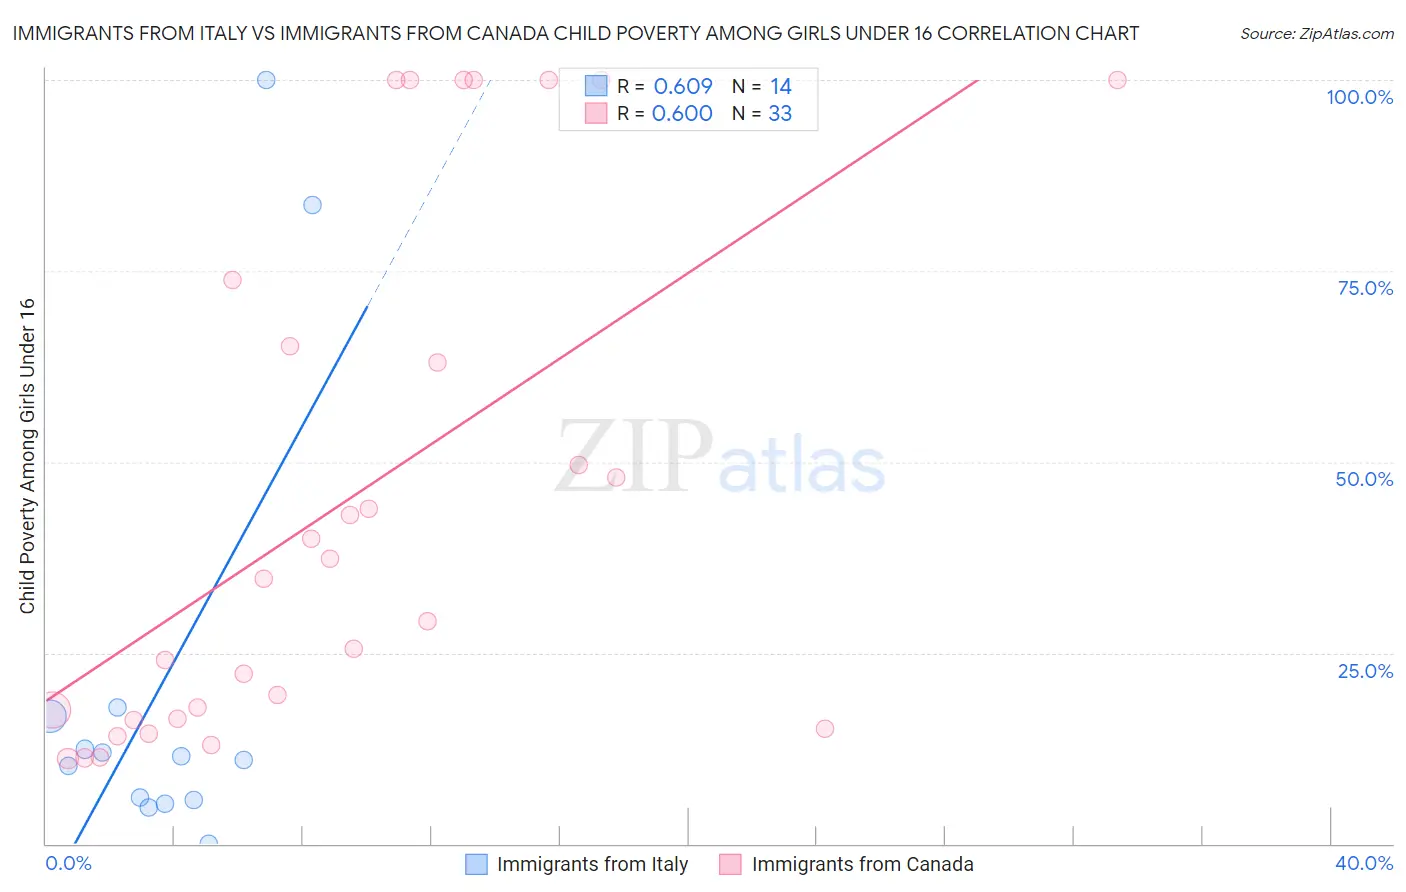 Immigrants from Italy vs Immigrants from Canada Child Poverty Among Girls Under 16